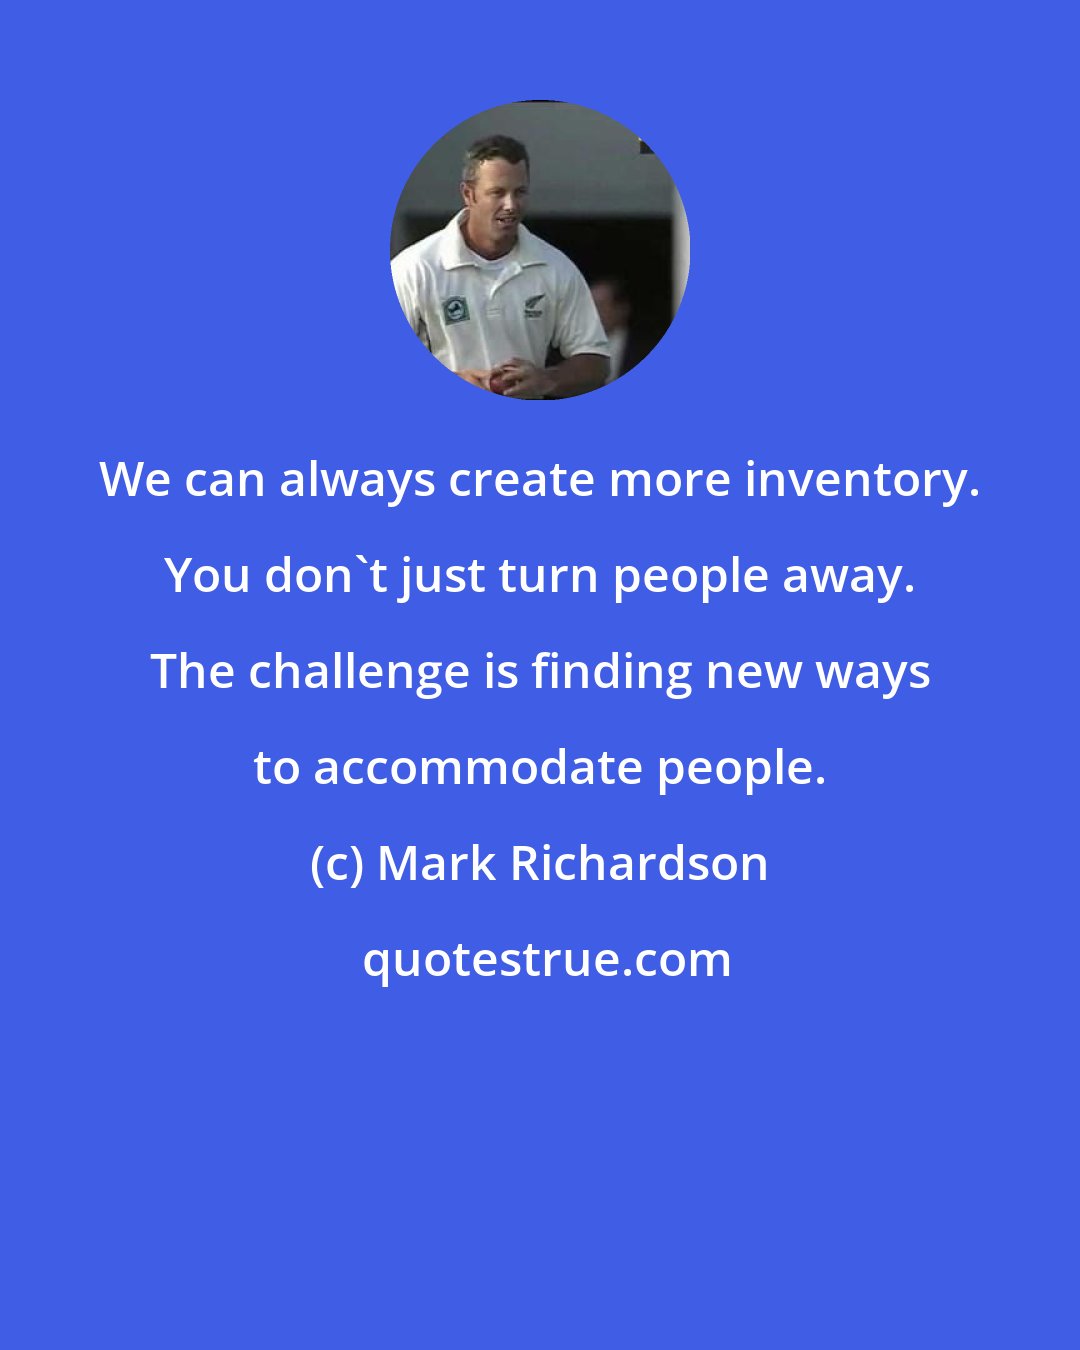 Mark Richardson: We can always create more inventory. You don't just turn people away. The challenge is finding new ways to accommodate people.